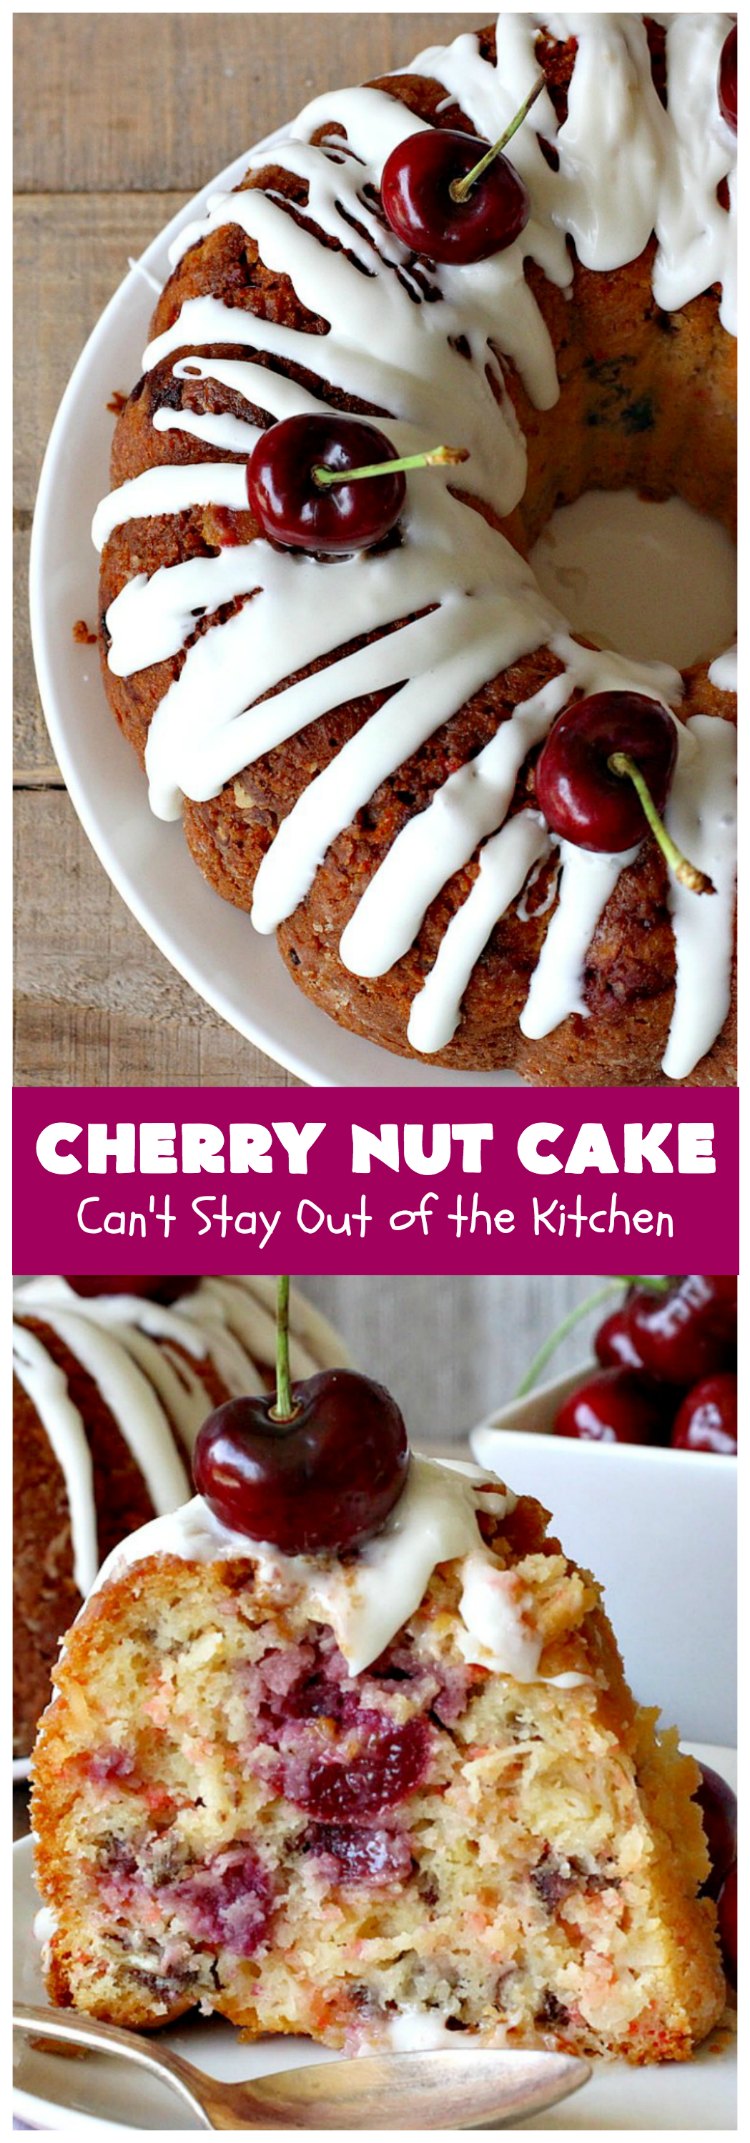 Cherry Nut Cake | Can't Stay Out of the Kitchen